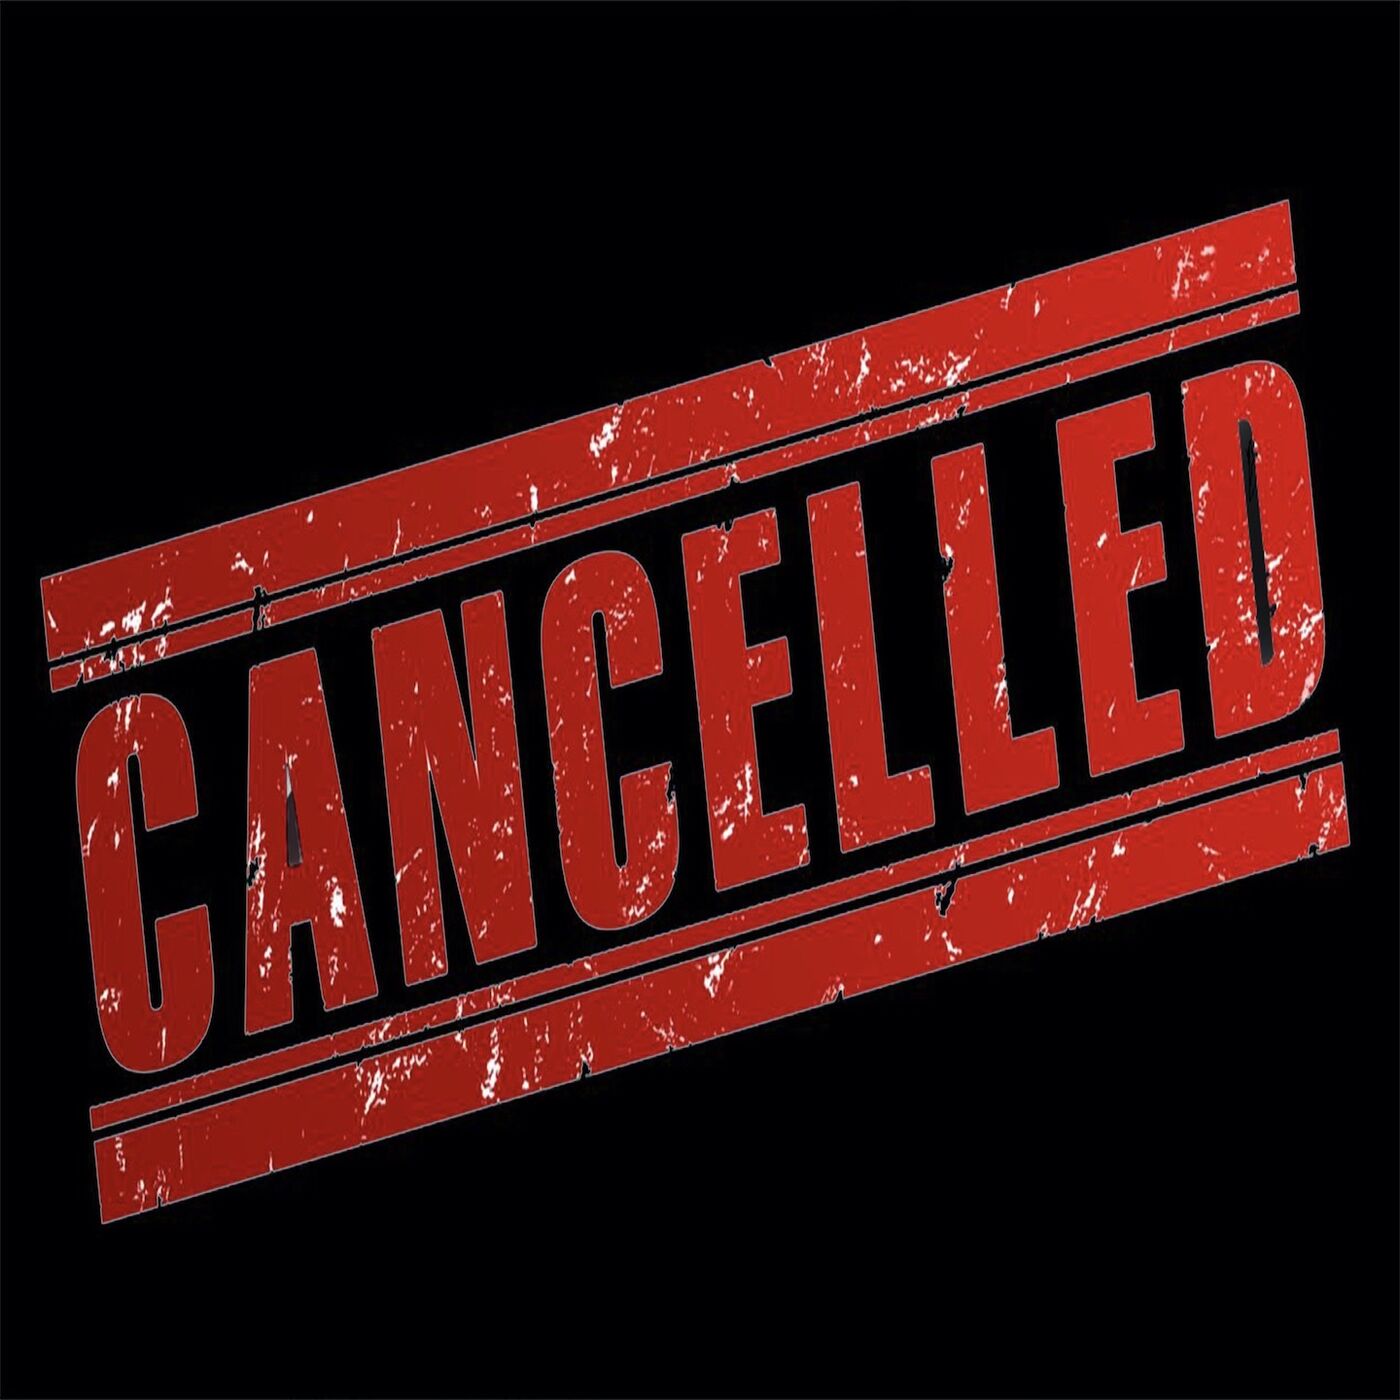 Words ruined by the internet - podcast cancelled - Cancelled